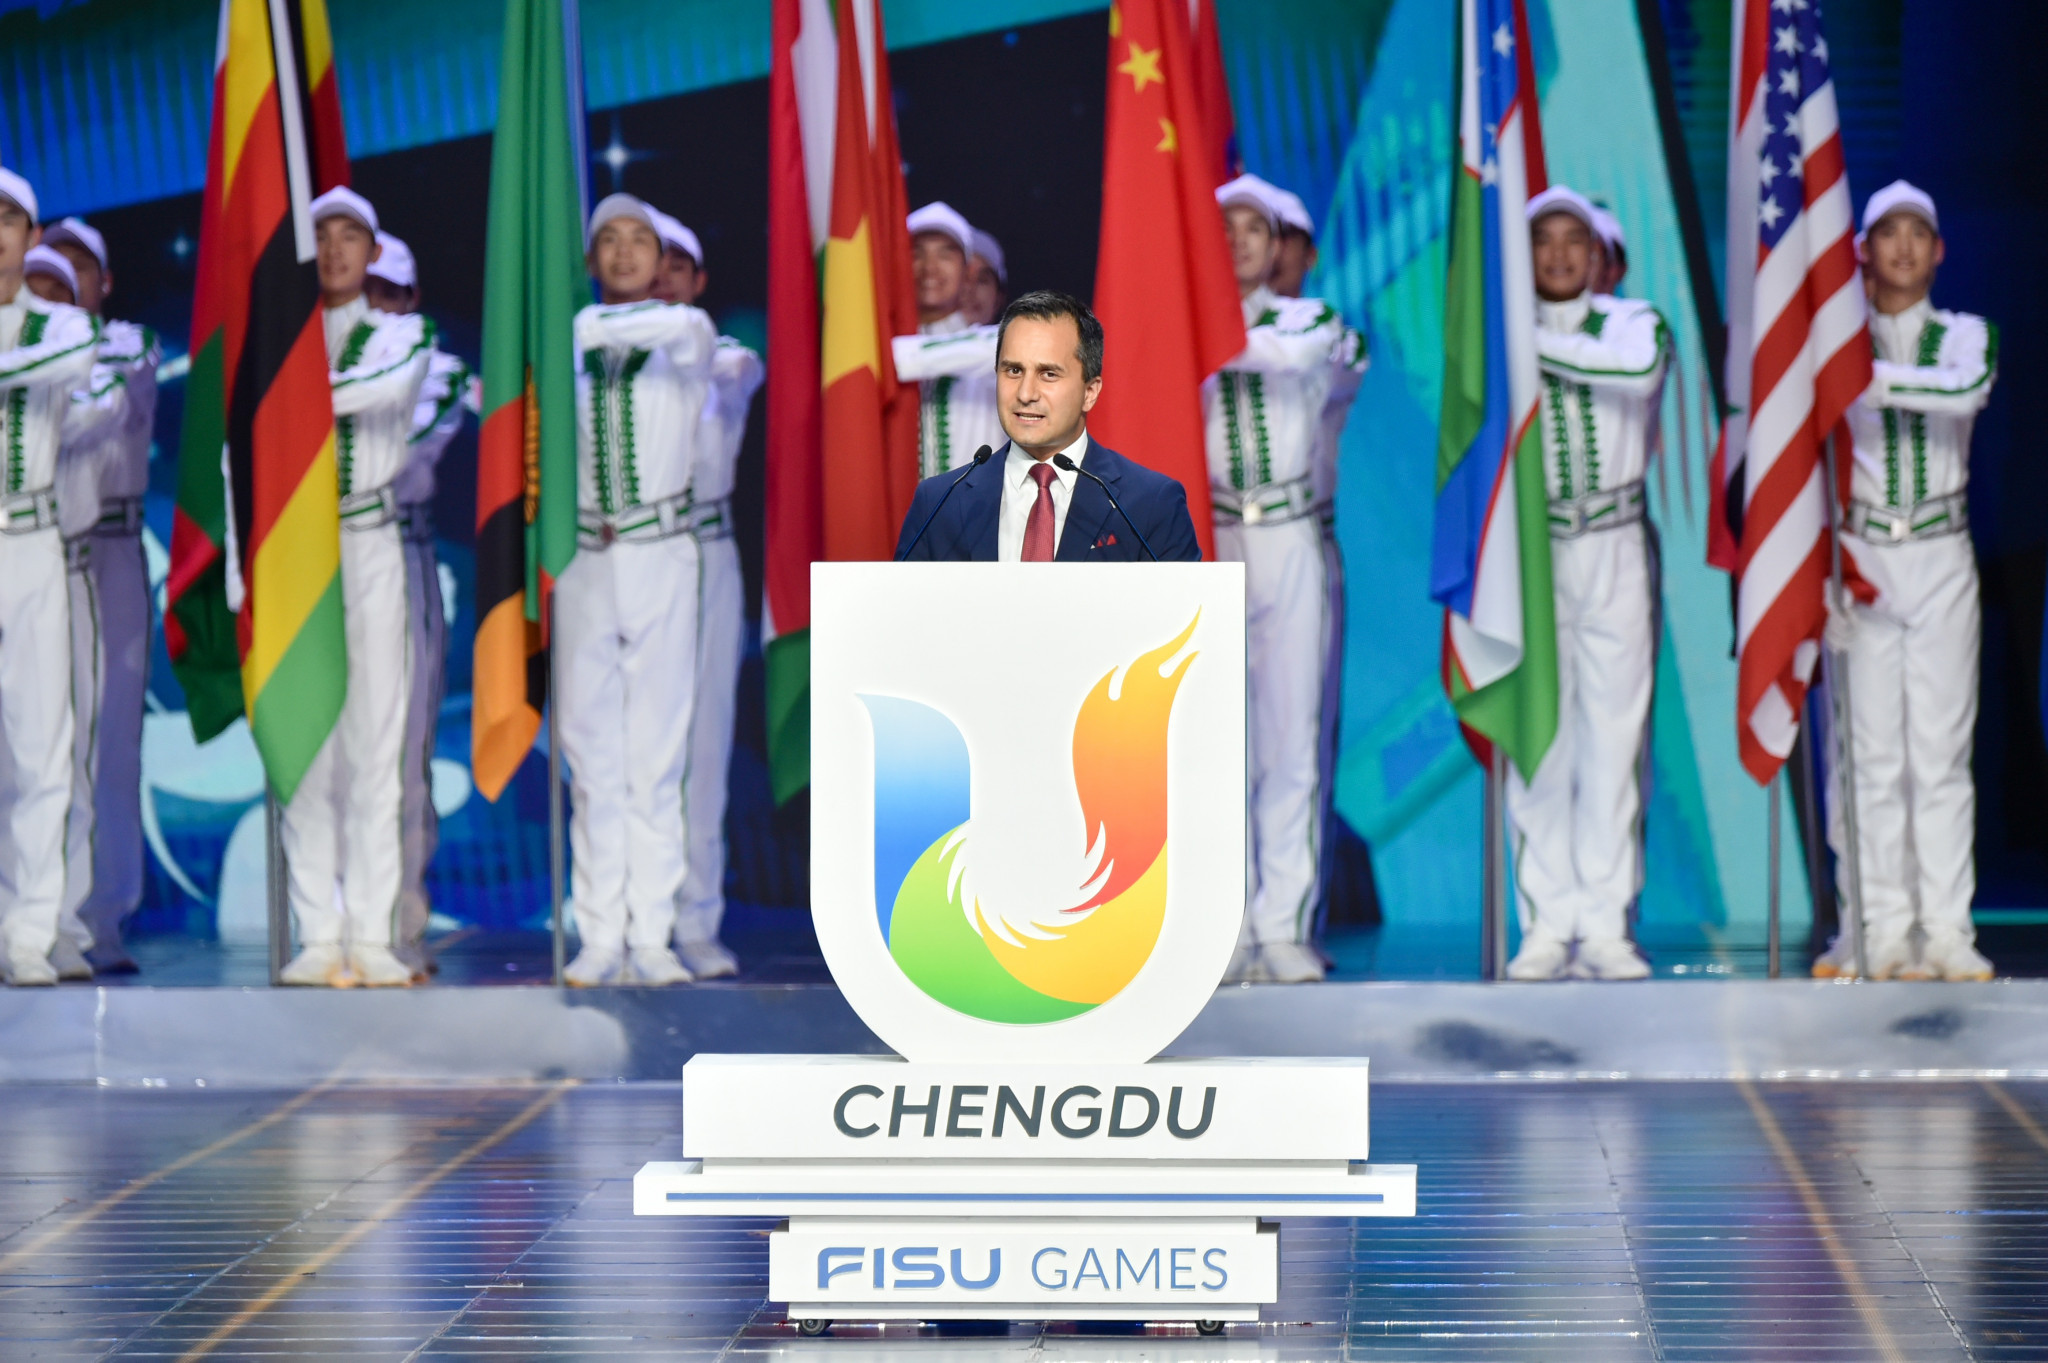 Mahmut Özdemir, Secretary of State in Germany’s Ministry of Interior and Community, is confident Rhine-Ruhr 2025 will deliver a successful Summer World University Games ©Rhine-Ruhr 2025